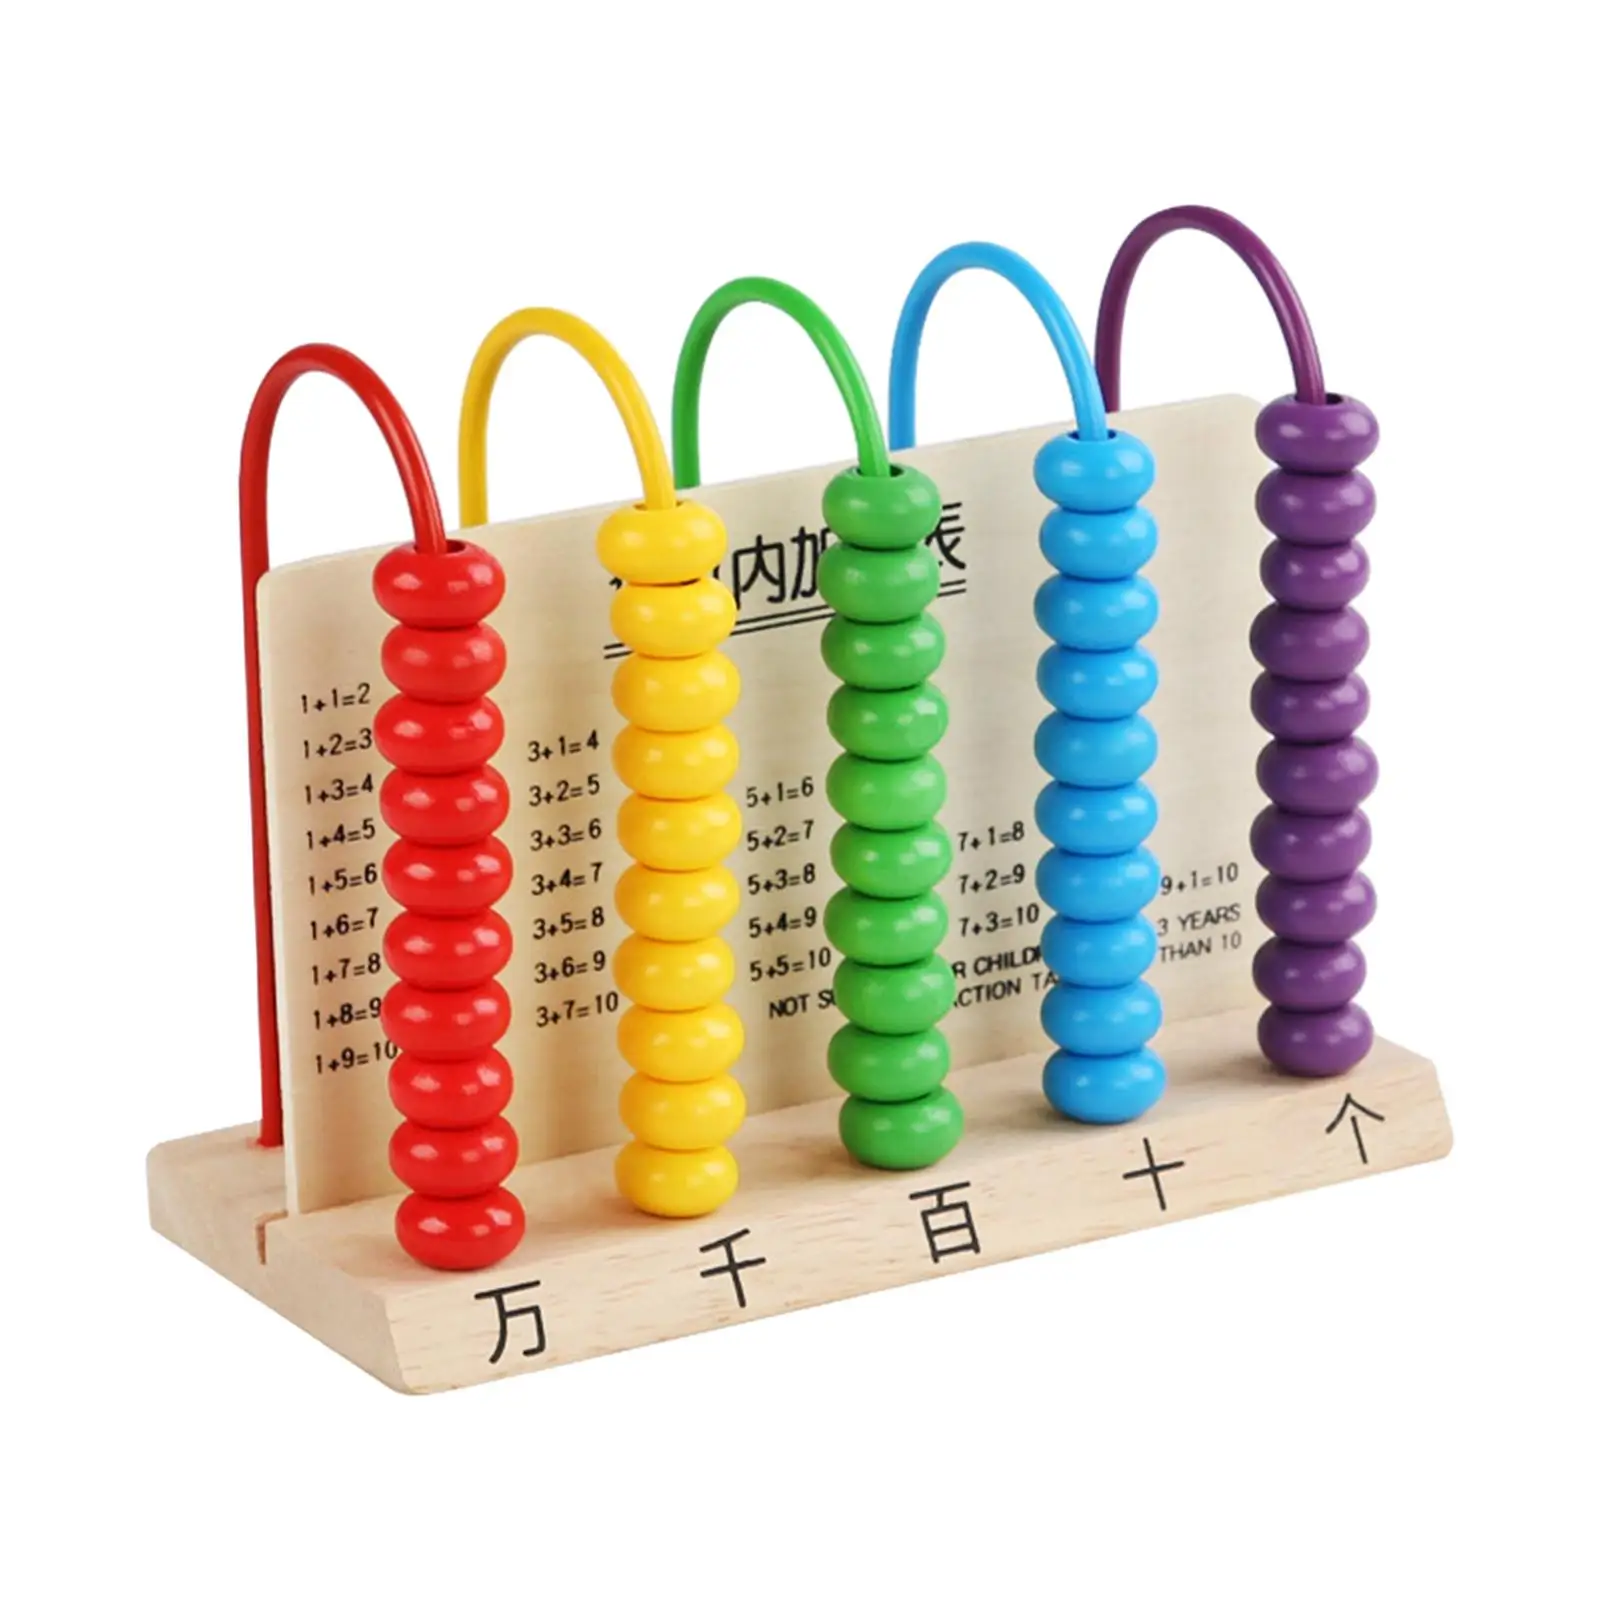 Classic Wooden Educational Counting Toy Wooden for Preschool Kids Toddlers